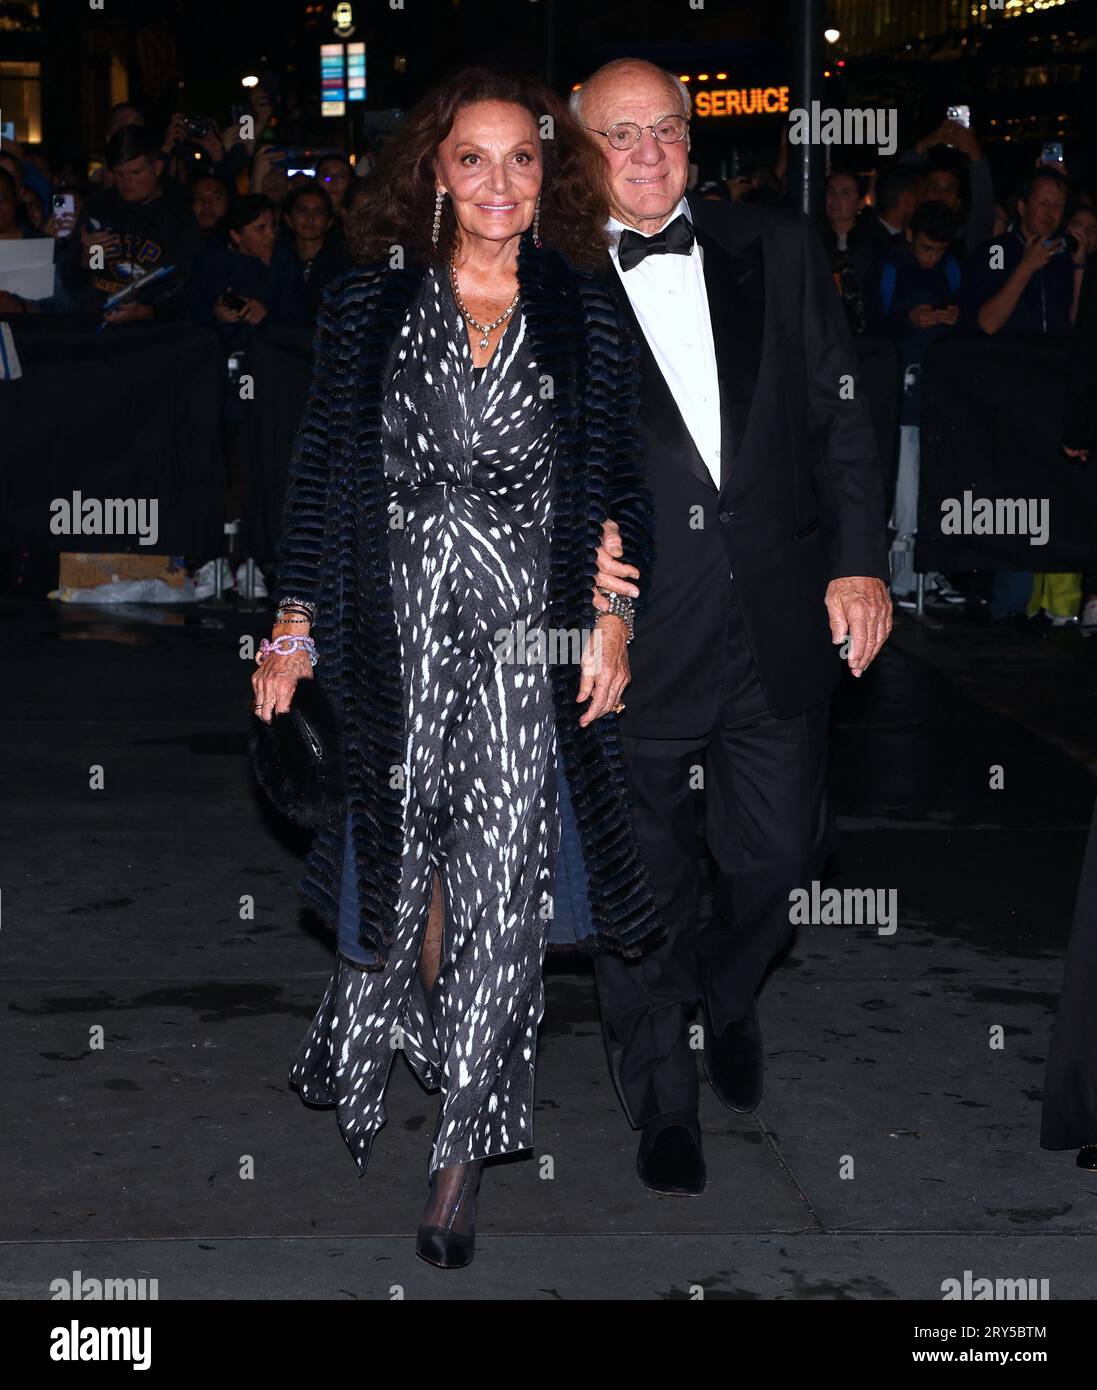 New York City, NY, USA September 28, 2023 Barry Diller and Diane von Furstenberg arrive at The 2023 Clooney Foundation for Justice's The Albies at The Public Library in New York City, NY, USA on September 28, 2023. Photo by Charles Guerin/ABACAPRESS.COM Credit: Abaca Press/Alamy Live News Credit: Abaca Press/Alamy Live News Stock Photo